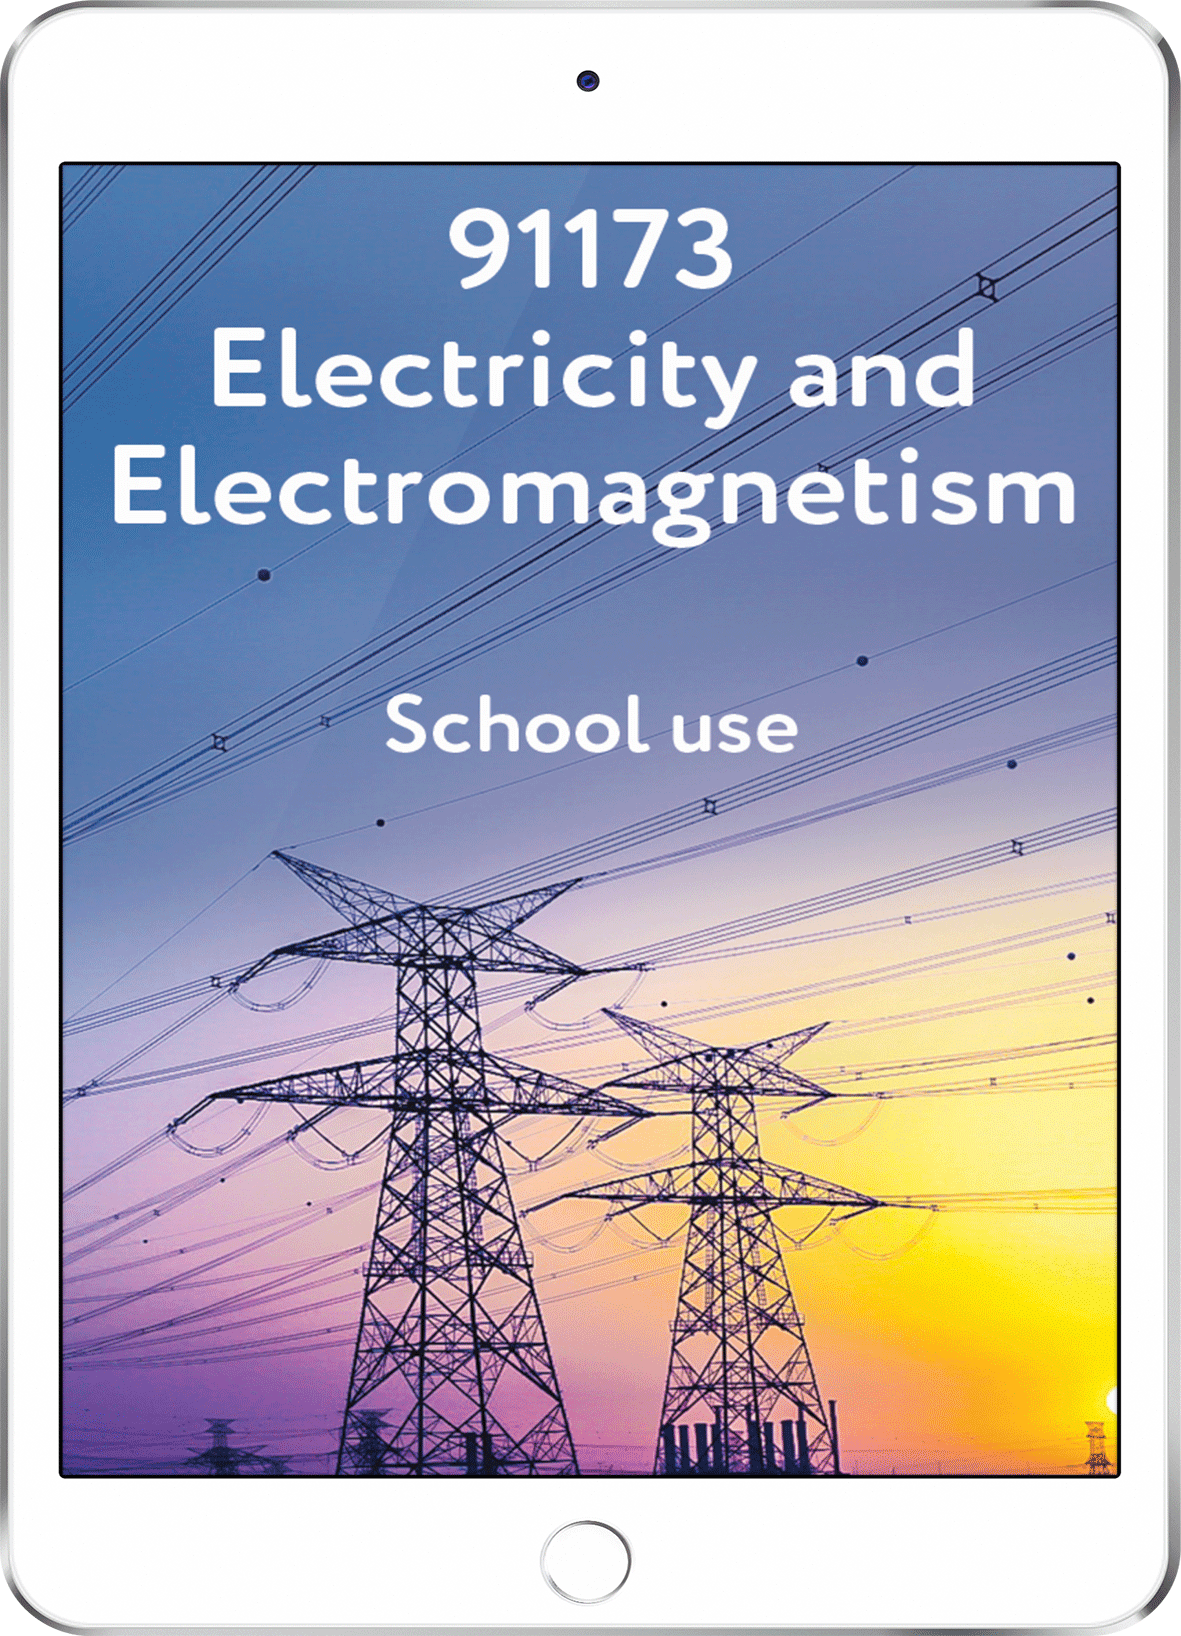 91173 Electricity and Electromagnetism - School Use